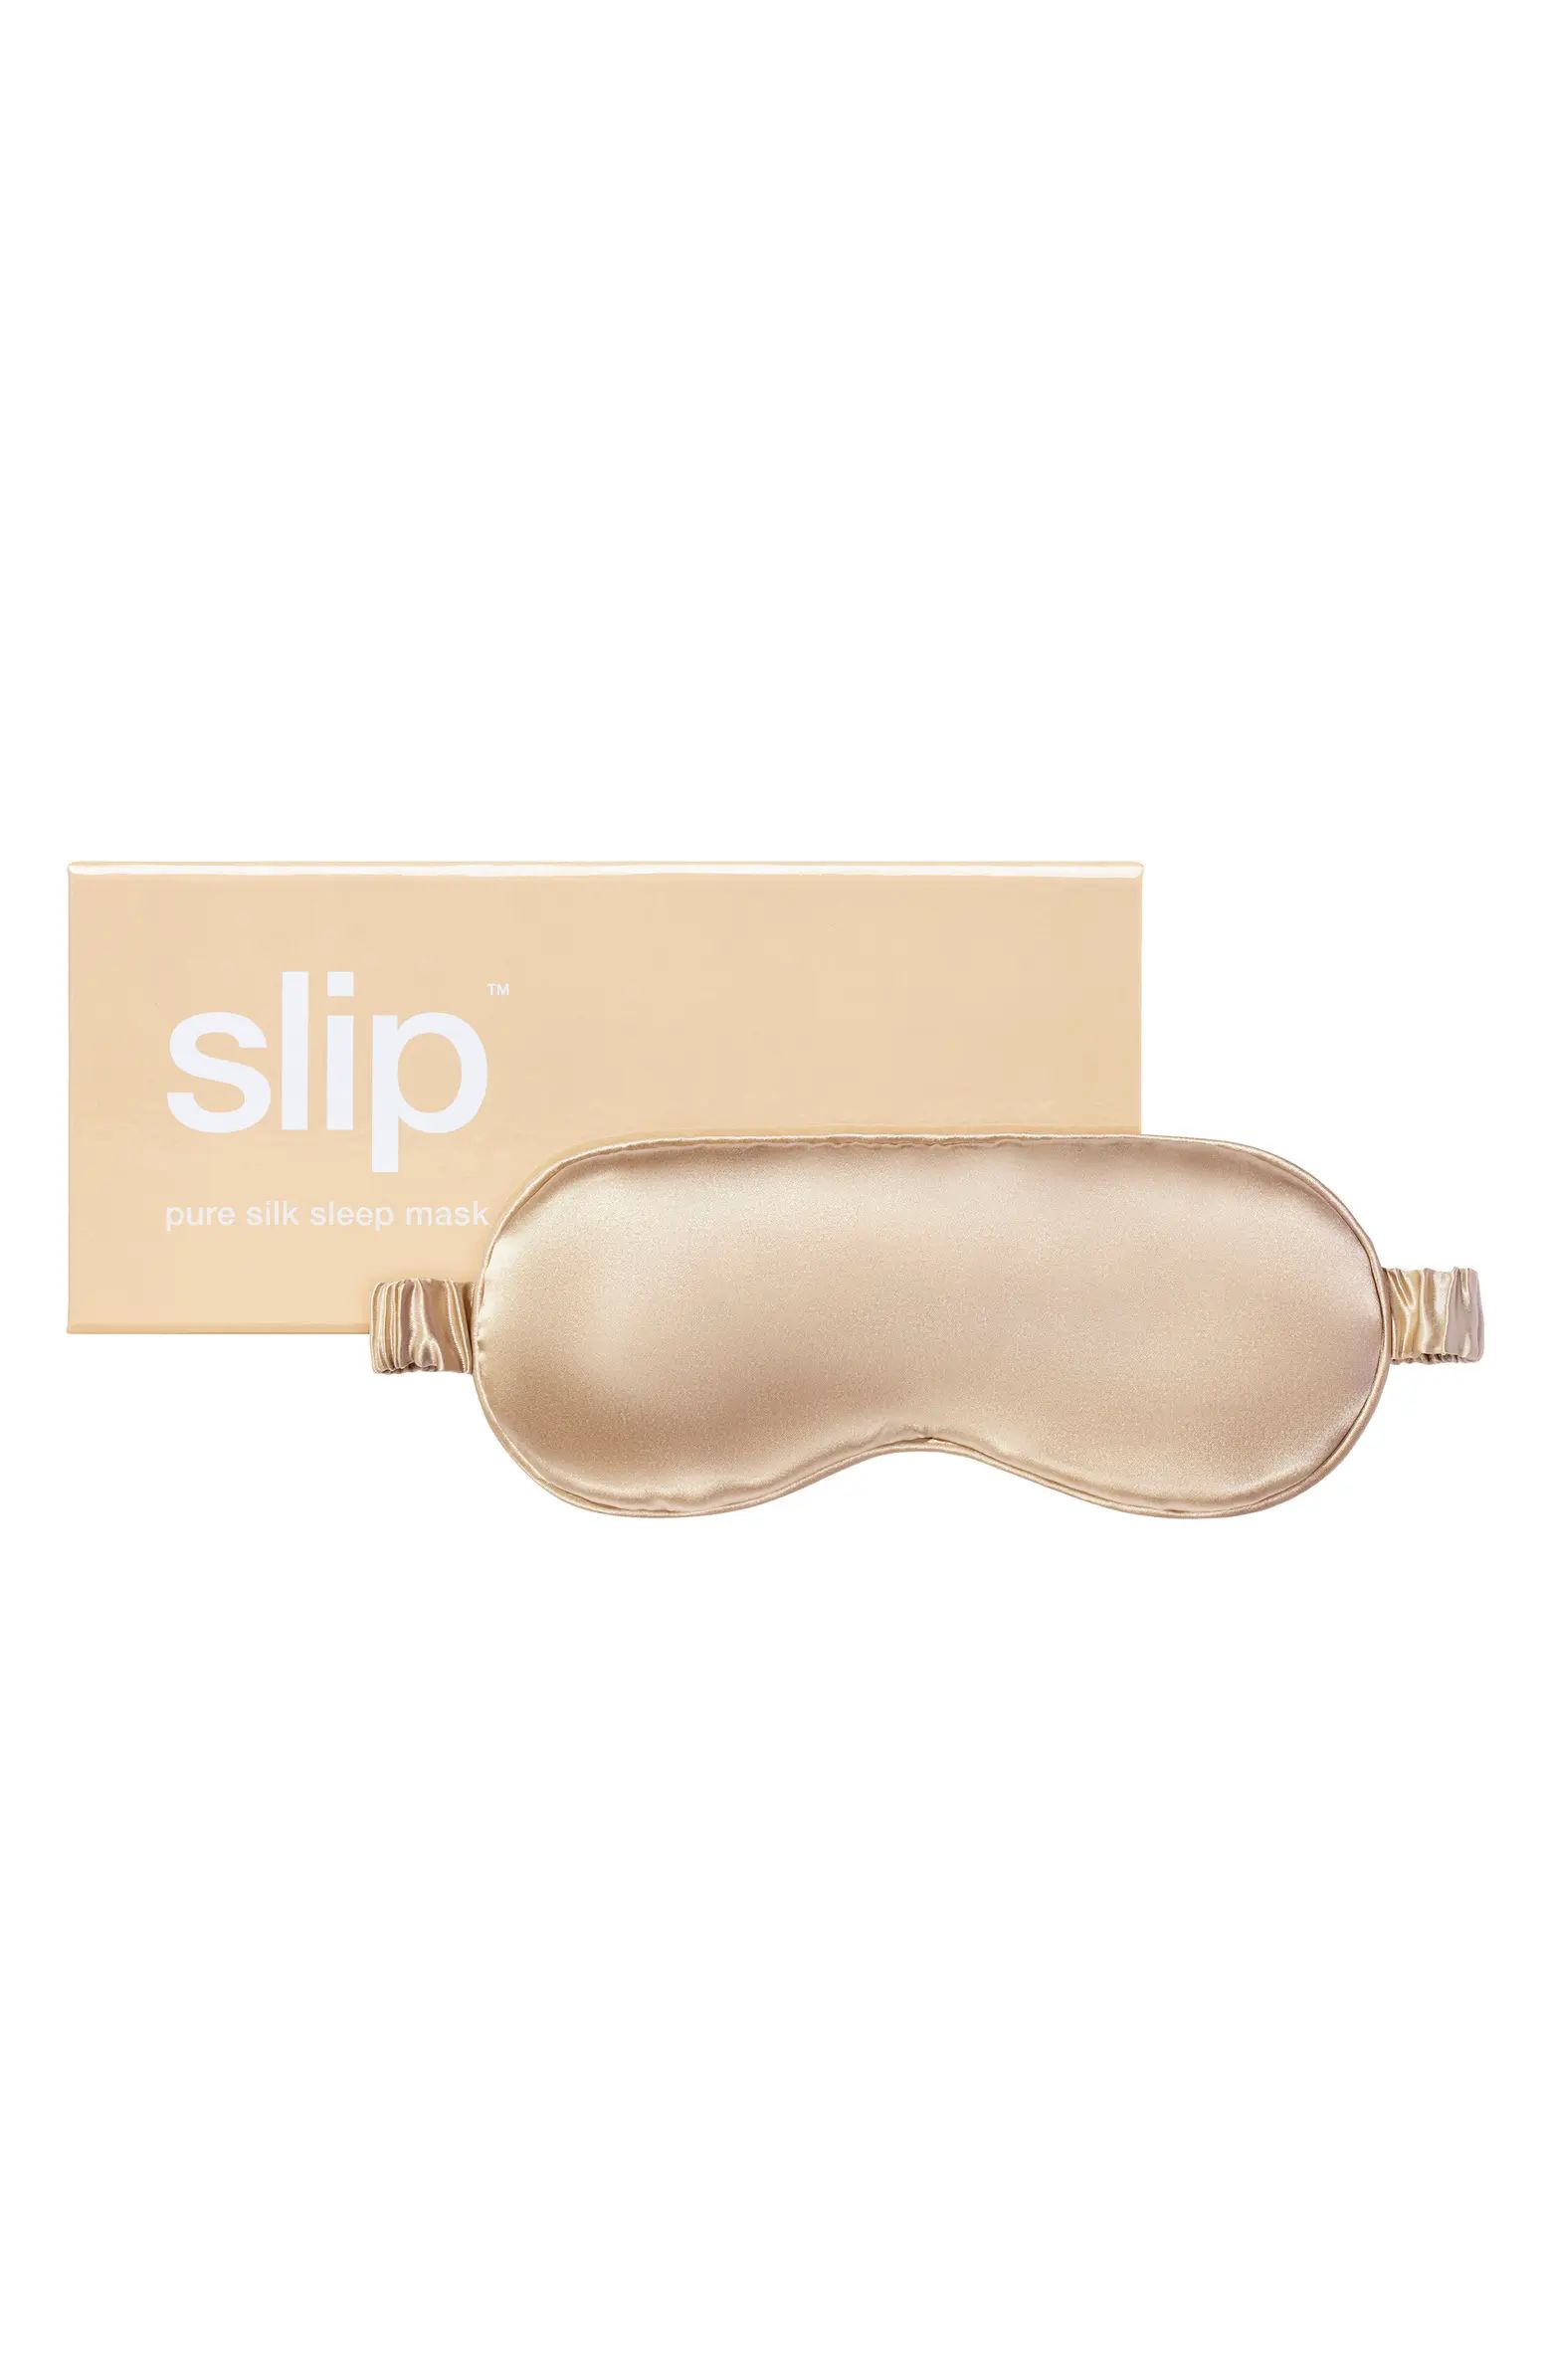 What it is: A pure silk sleep mask developed and refined over 10 years to provide the ultimate co... | Nordstrom